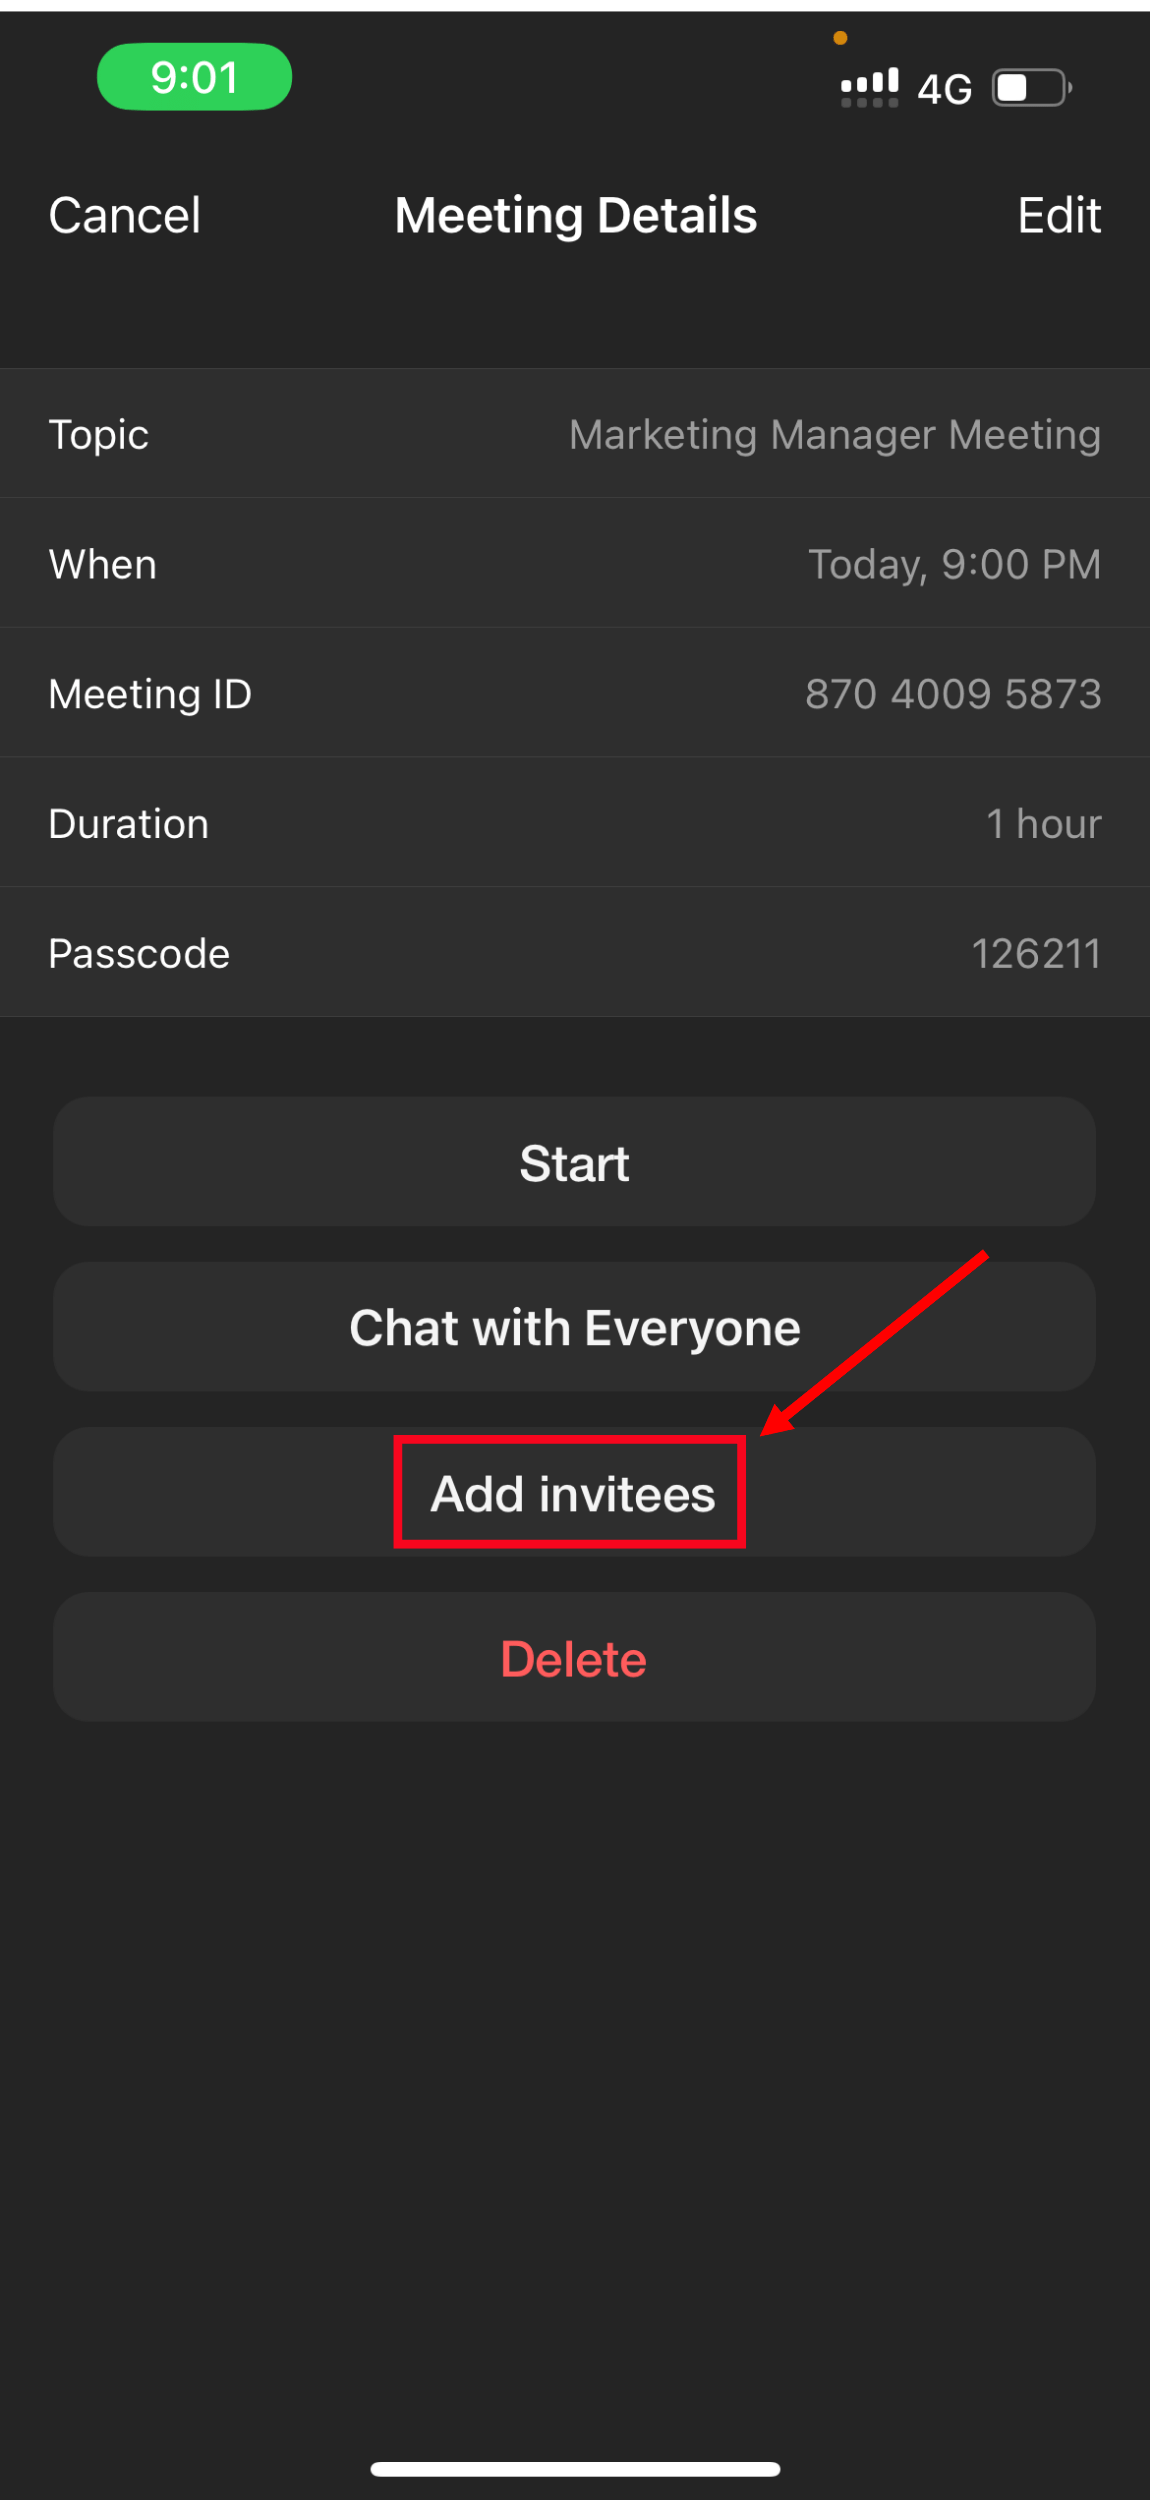 select add invites and pop up menu will appear